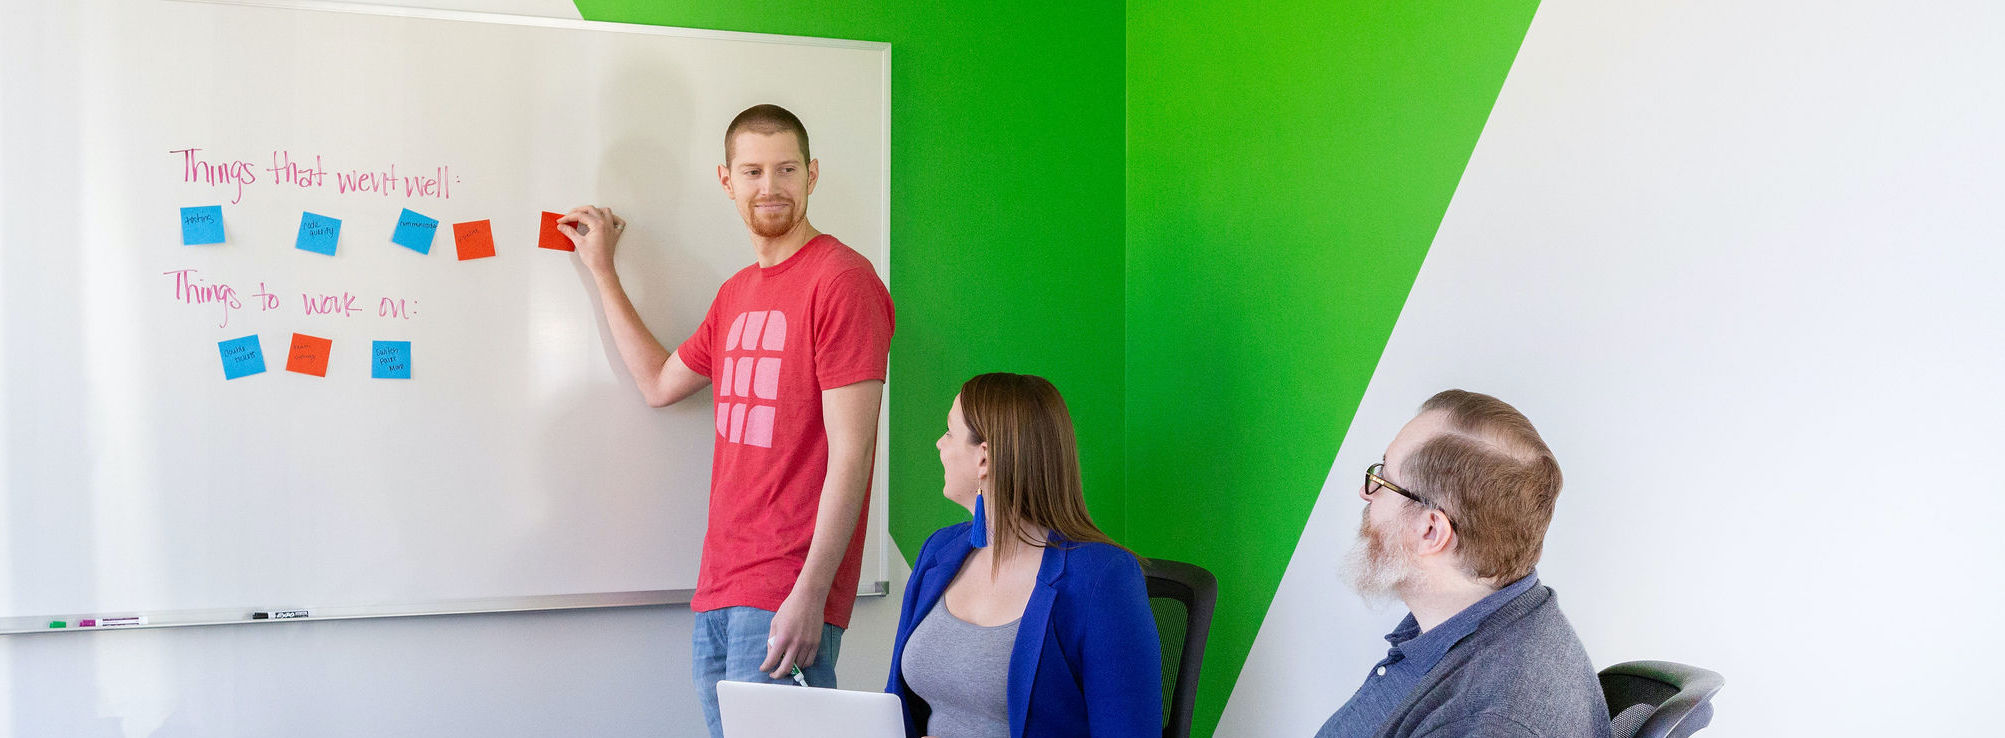 An Agile team putting sticky notes on a whiteboard during a retrospective